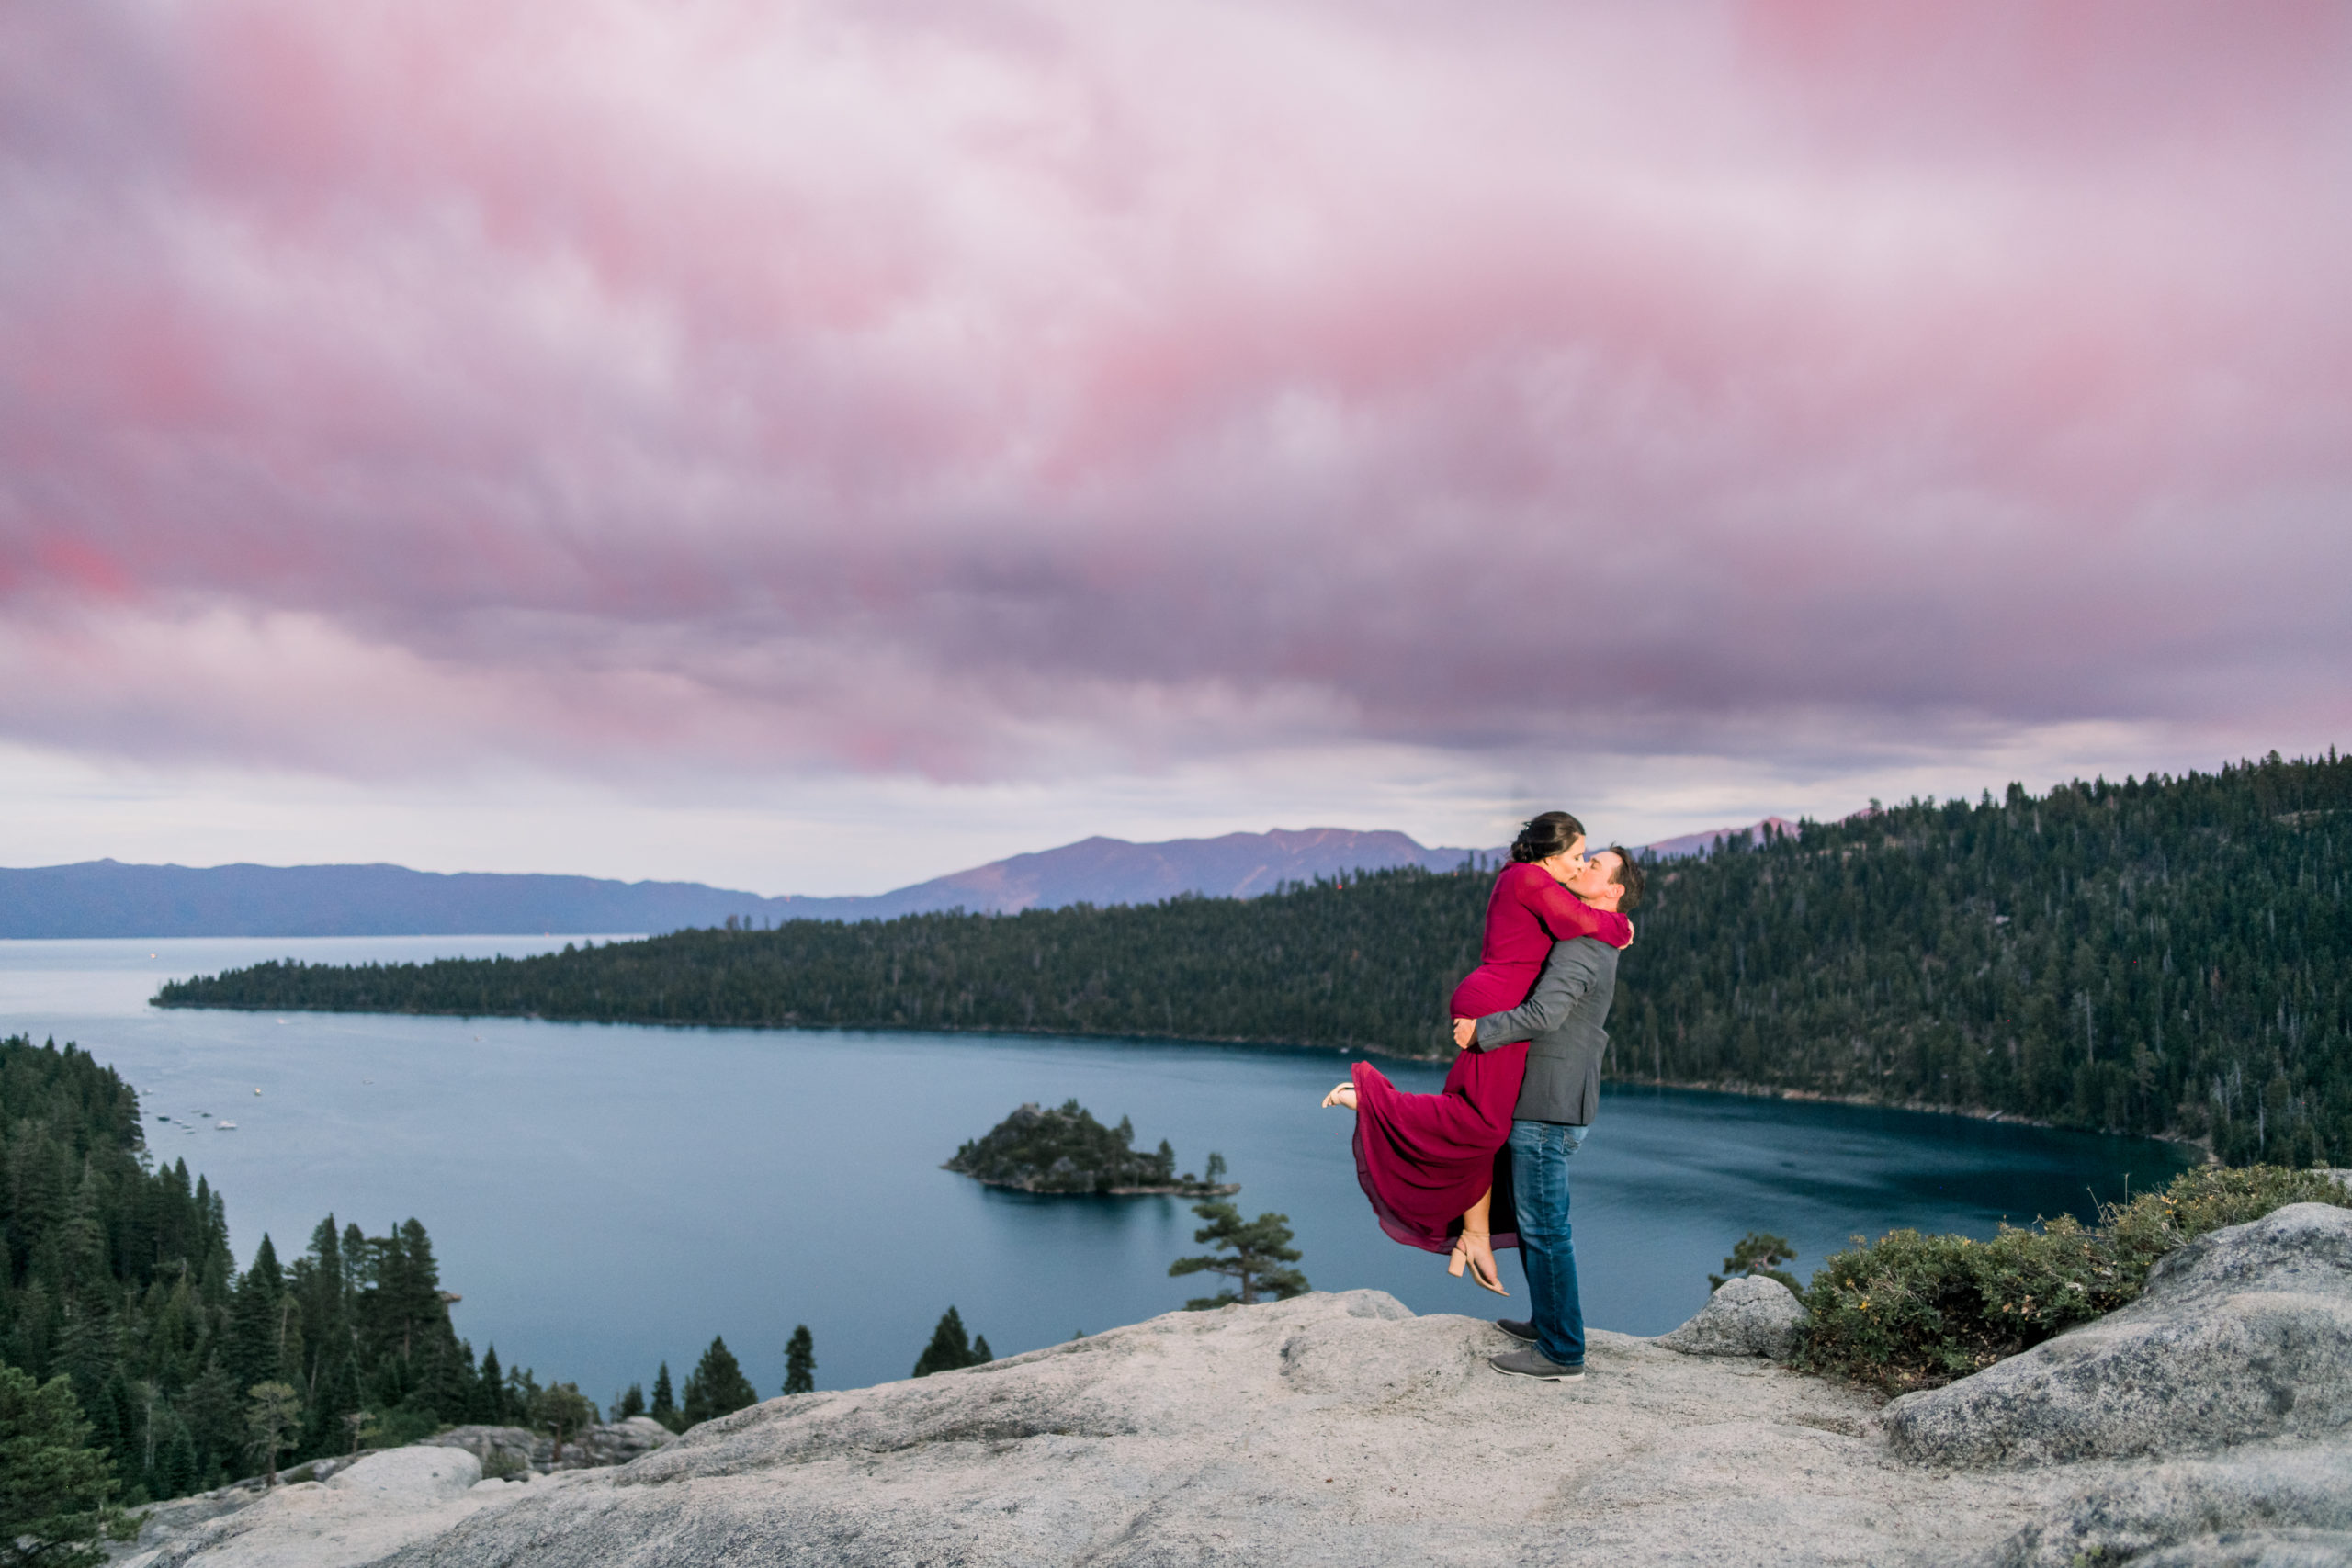 Best location to propose in California